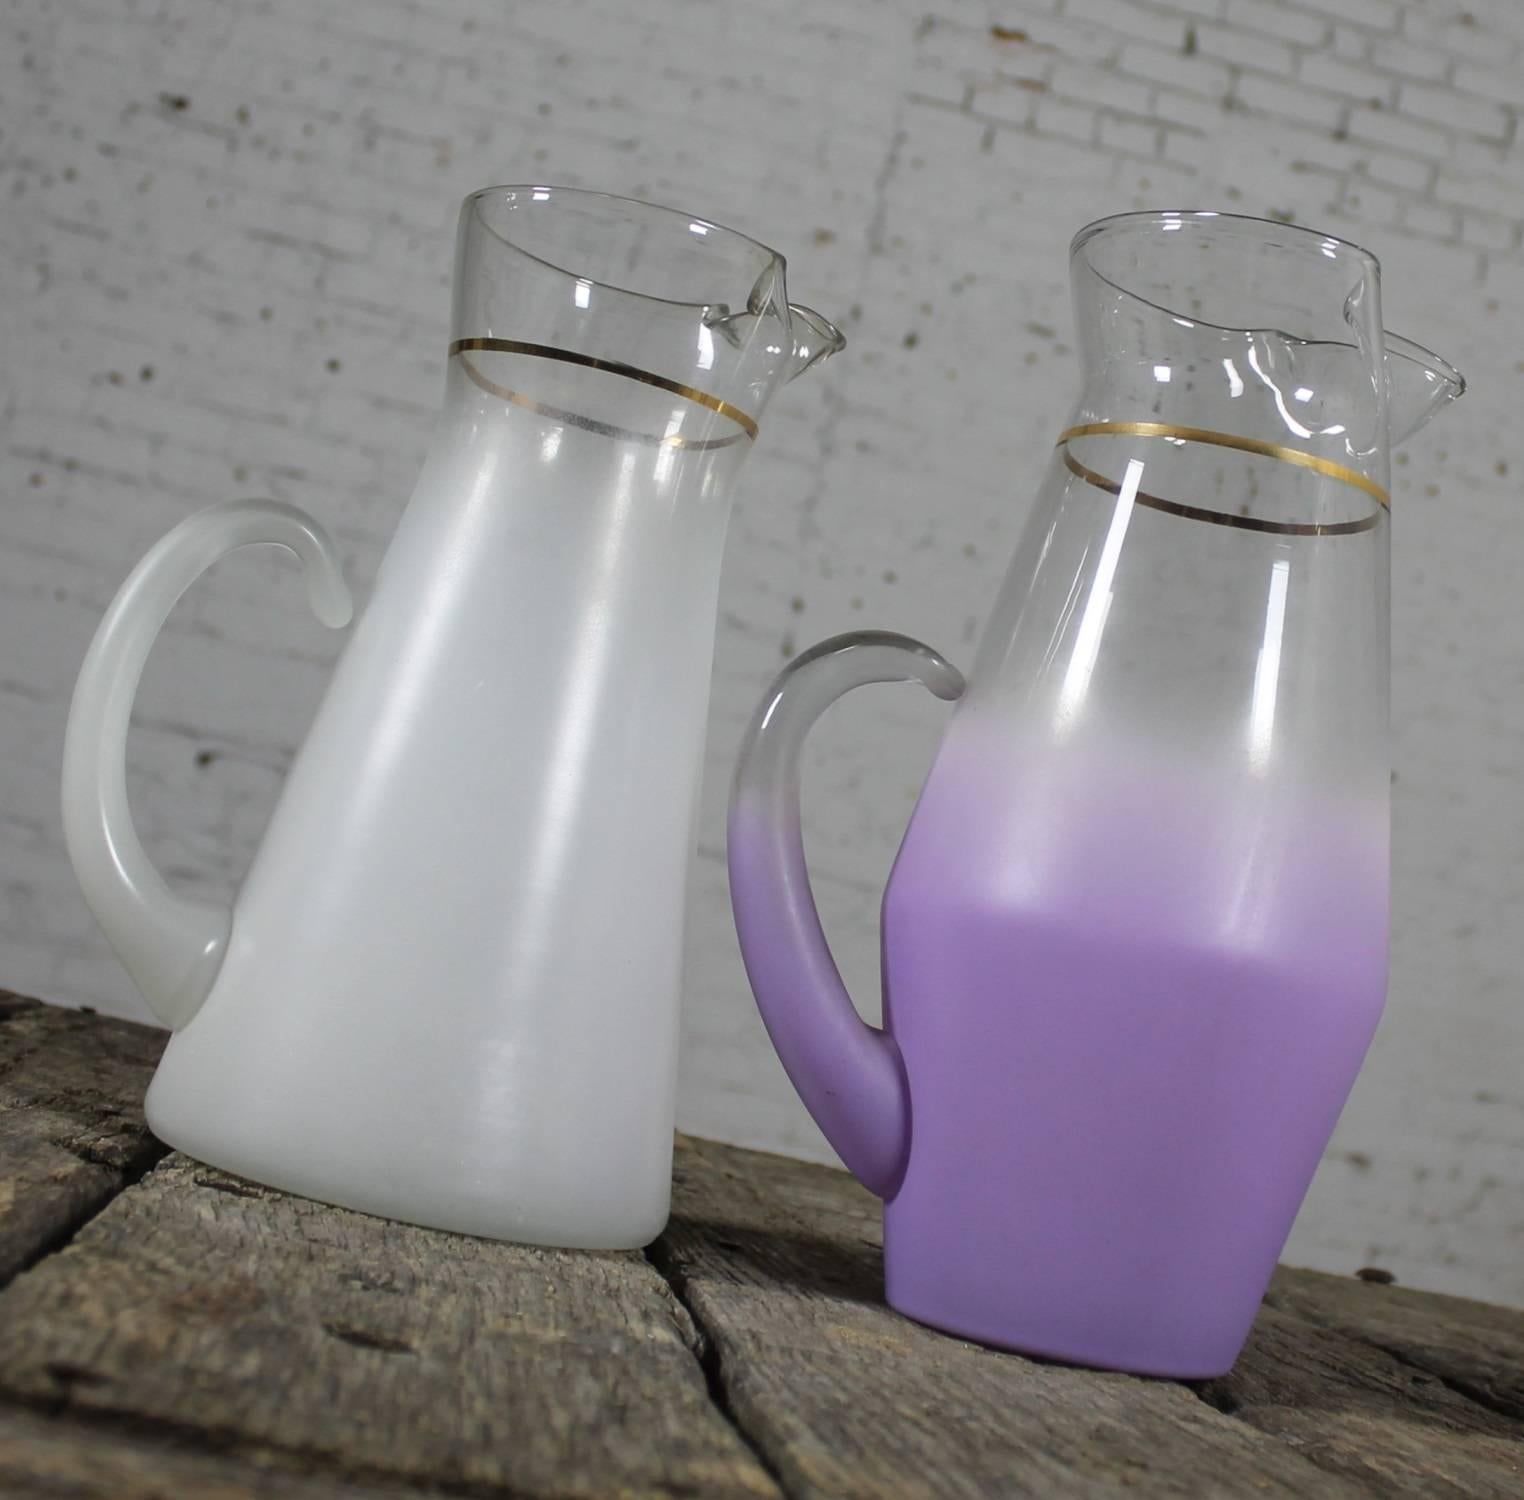 Fun Blendo pitchers by West Virginia Glass Specialty Co. for your cocktails or summer beverages. One white frosted glass with gold trim and one lavender frosted glass with gold trim. Both are in great vintage condition with no chips, cracks or